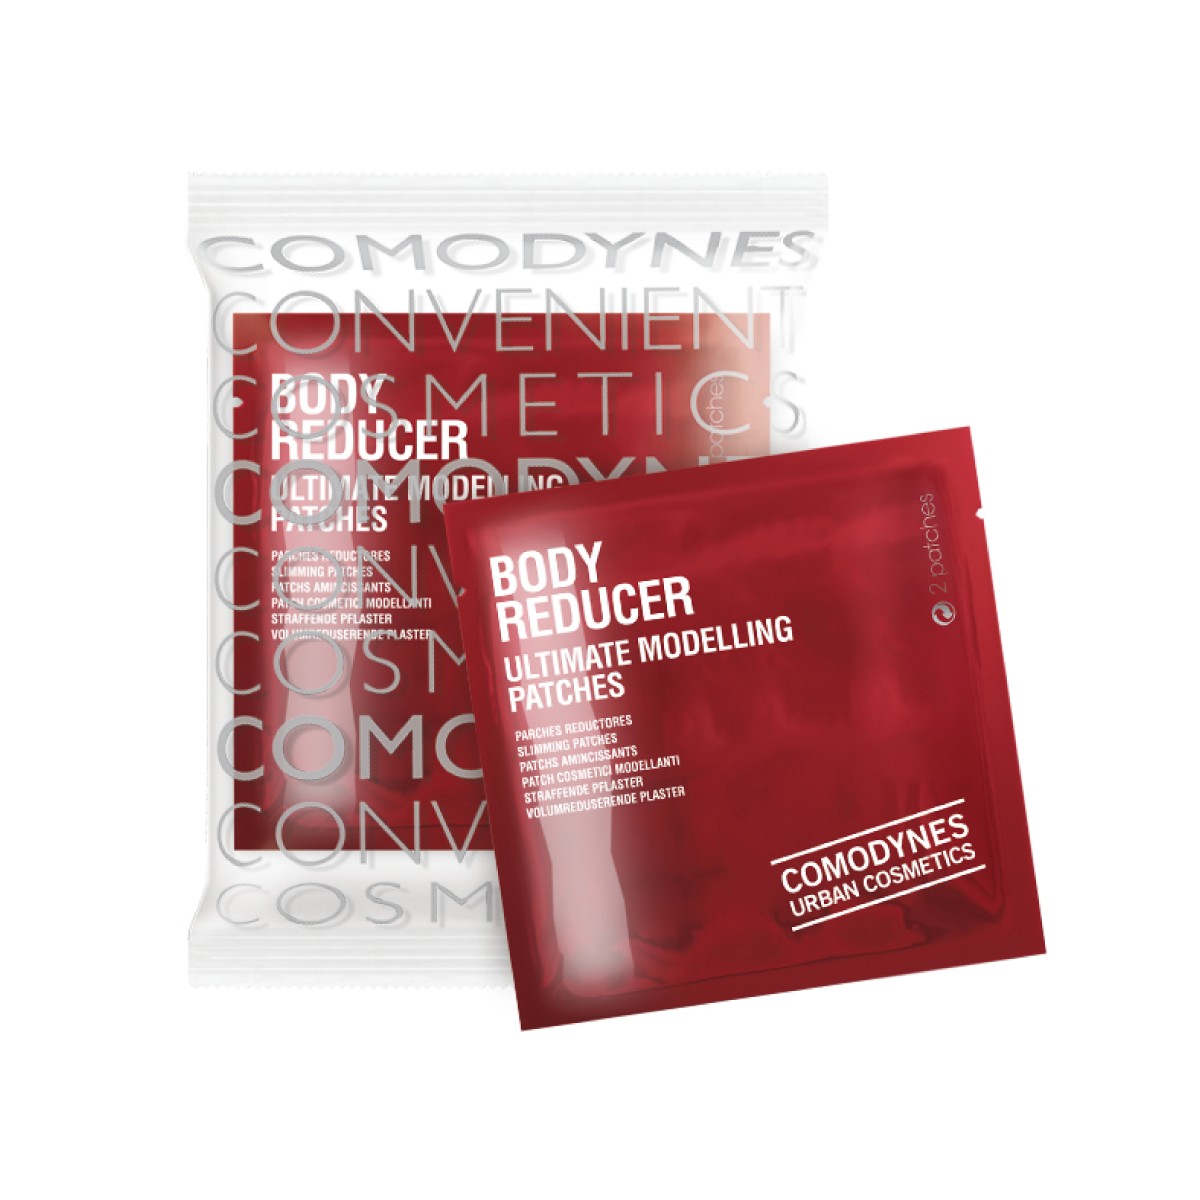 Comodynes Body Reducer parches reductores. 28 parches